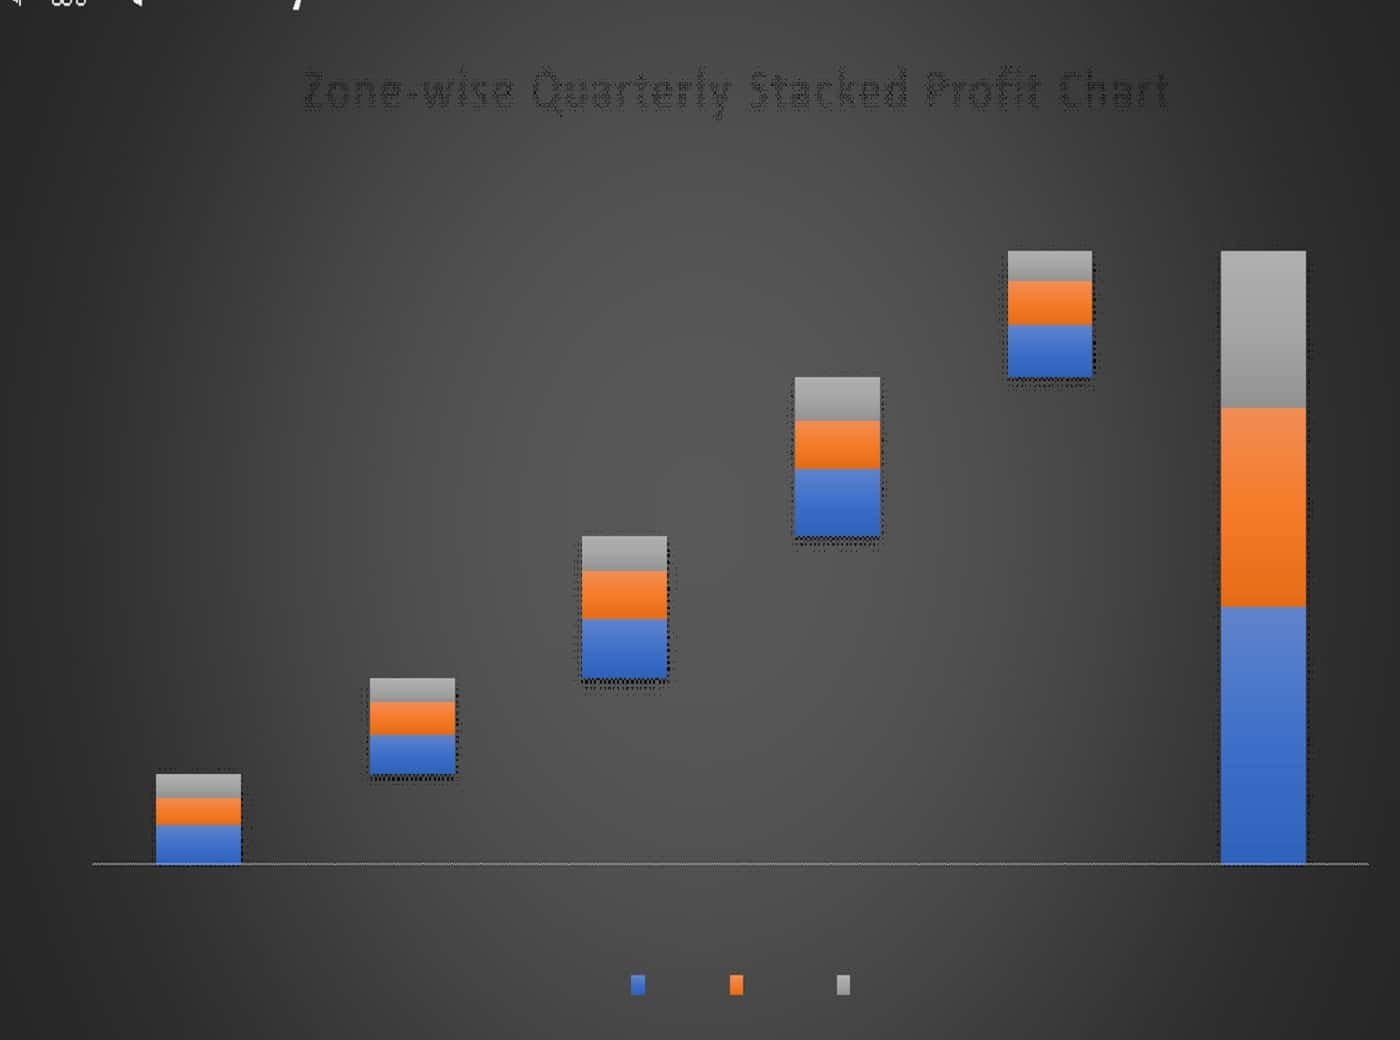 Stacked waterfall chart in Excel